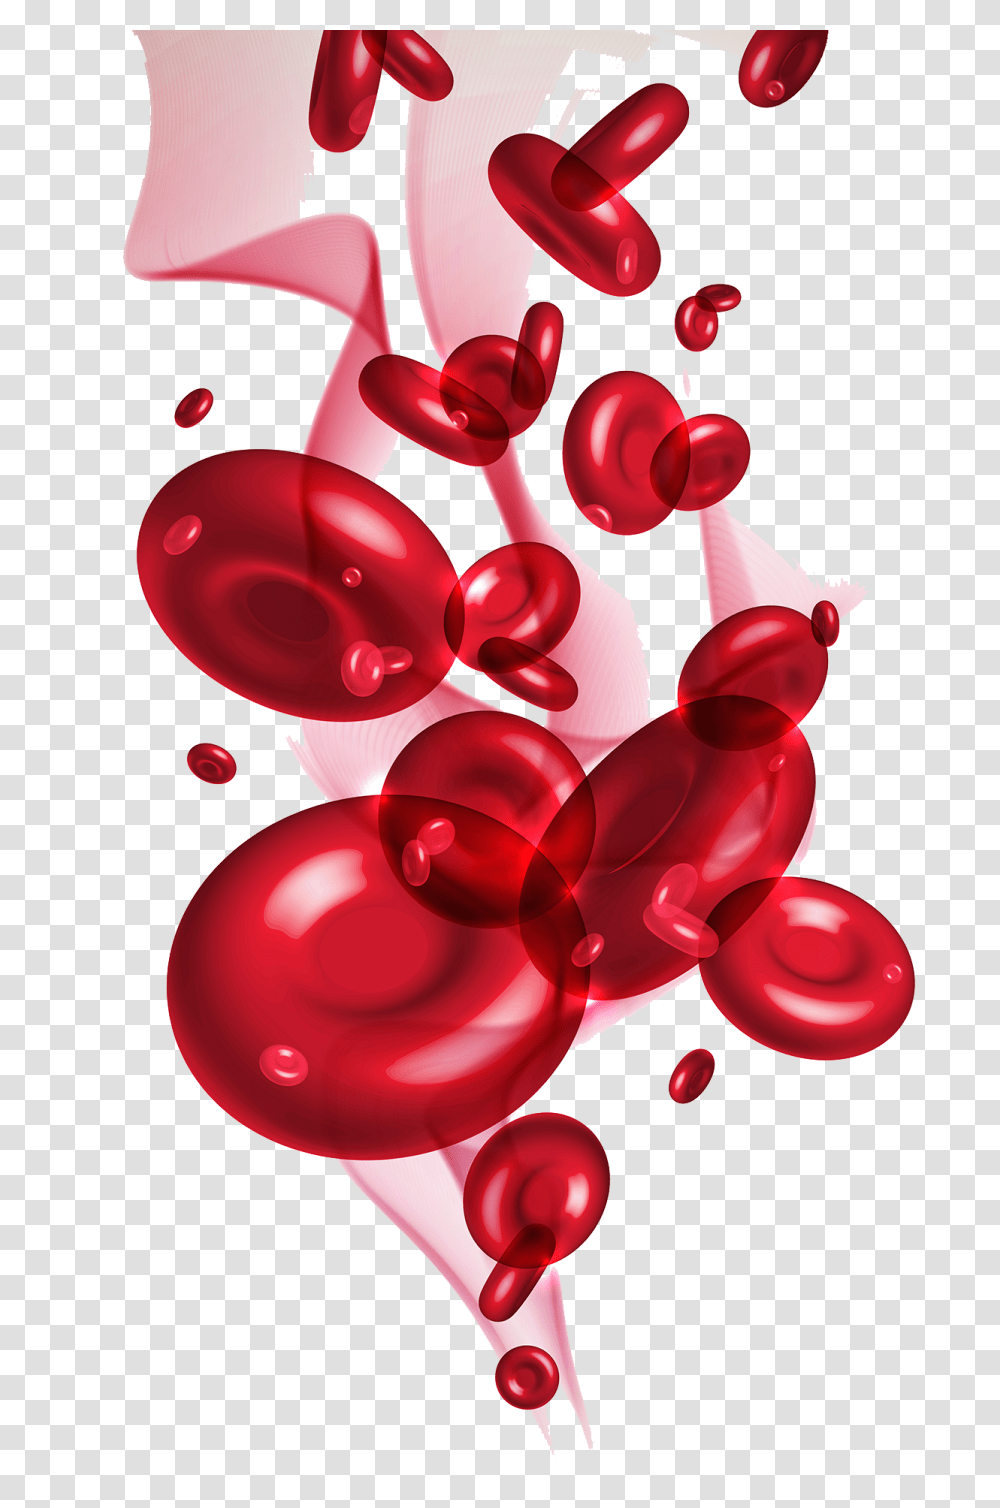 Pool Of Blood Blood Cells Image, Plant, Fruit, Food, Cherry Transparent Png